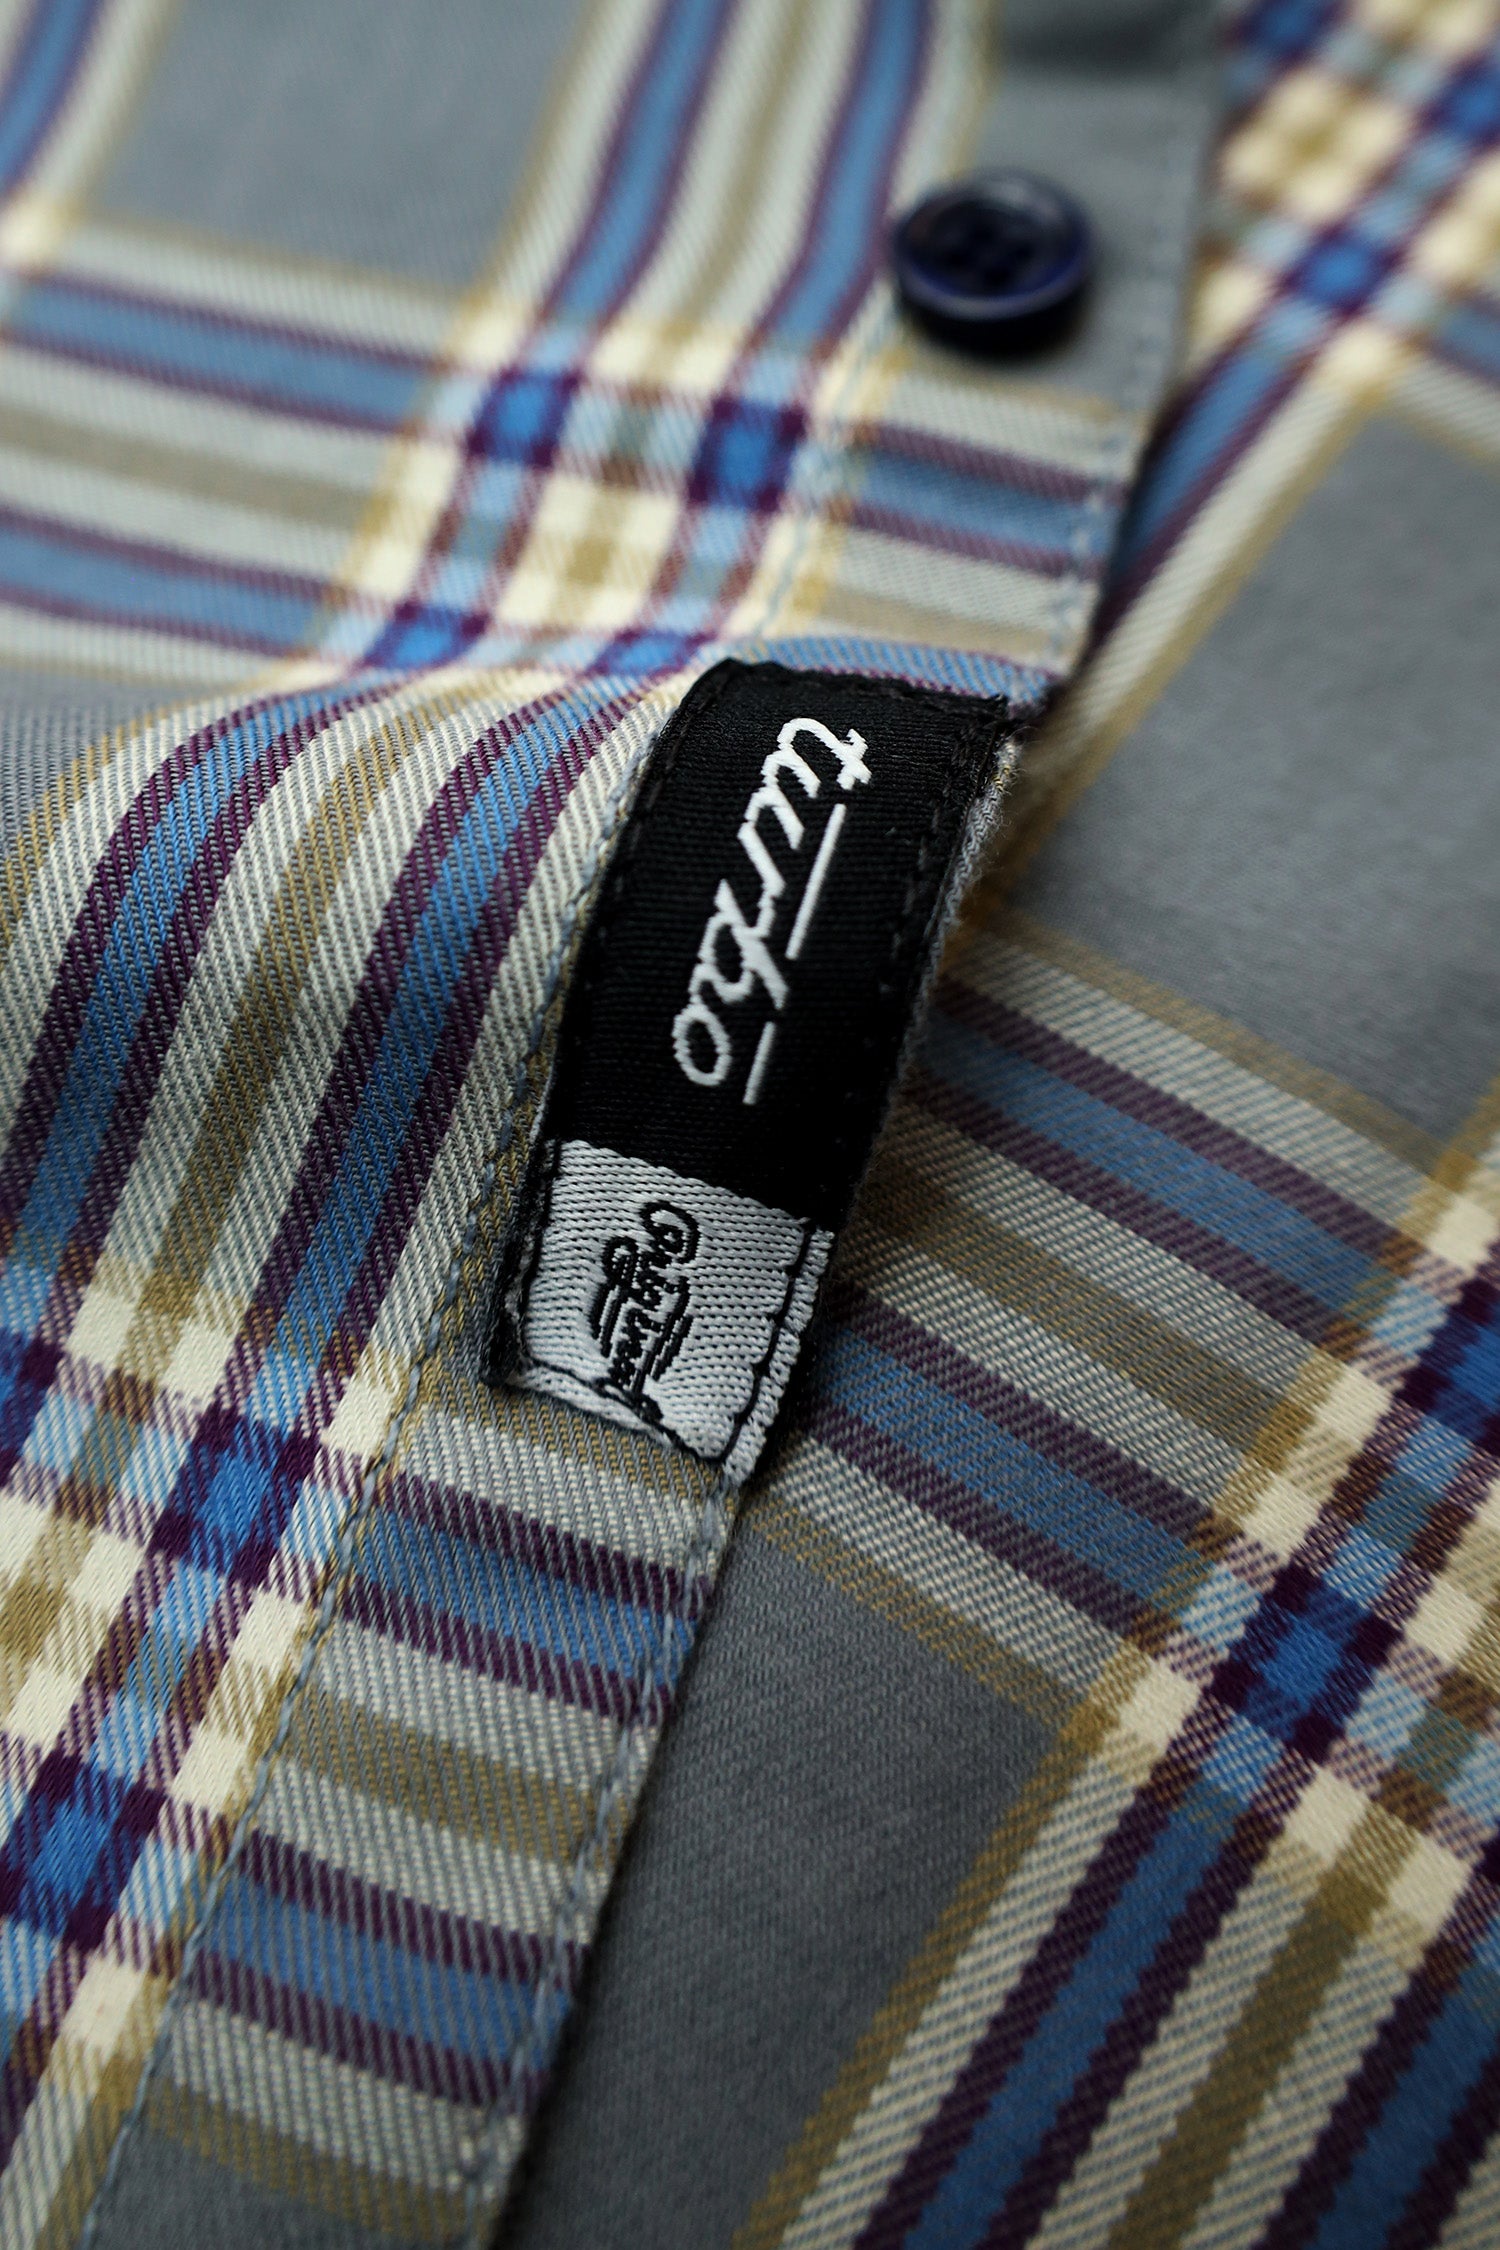 Checked Design Full Sleeve Casual Shirt